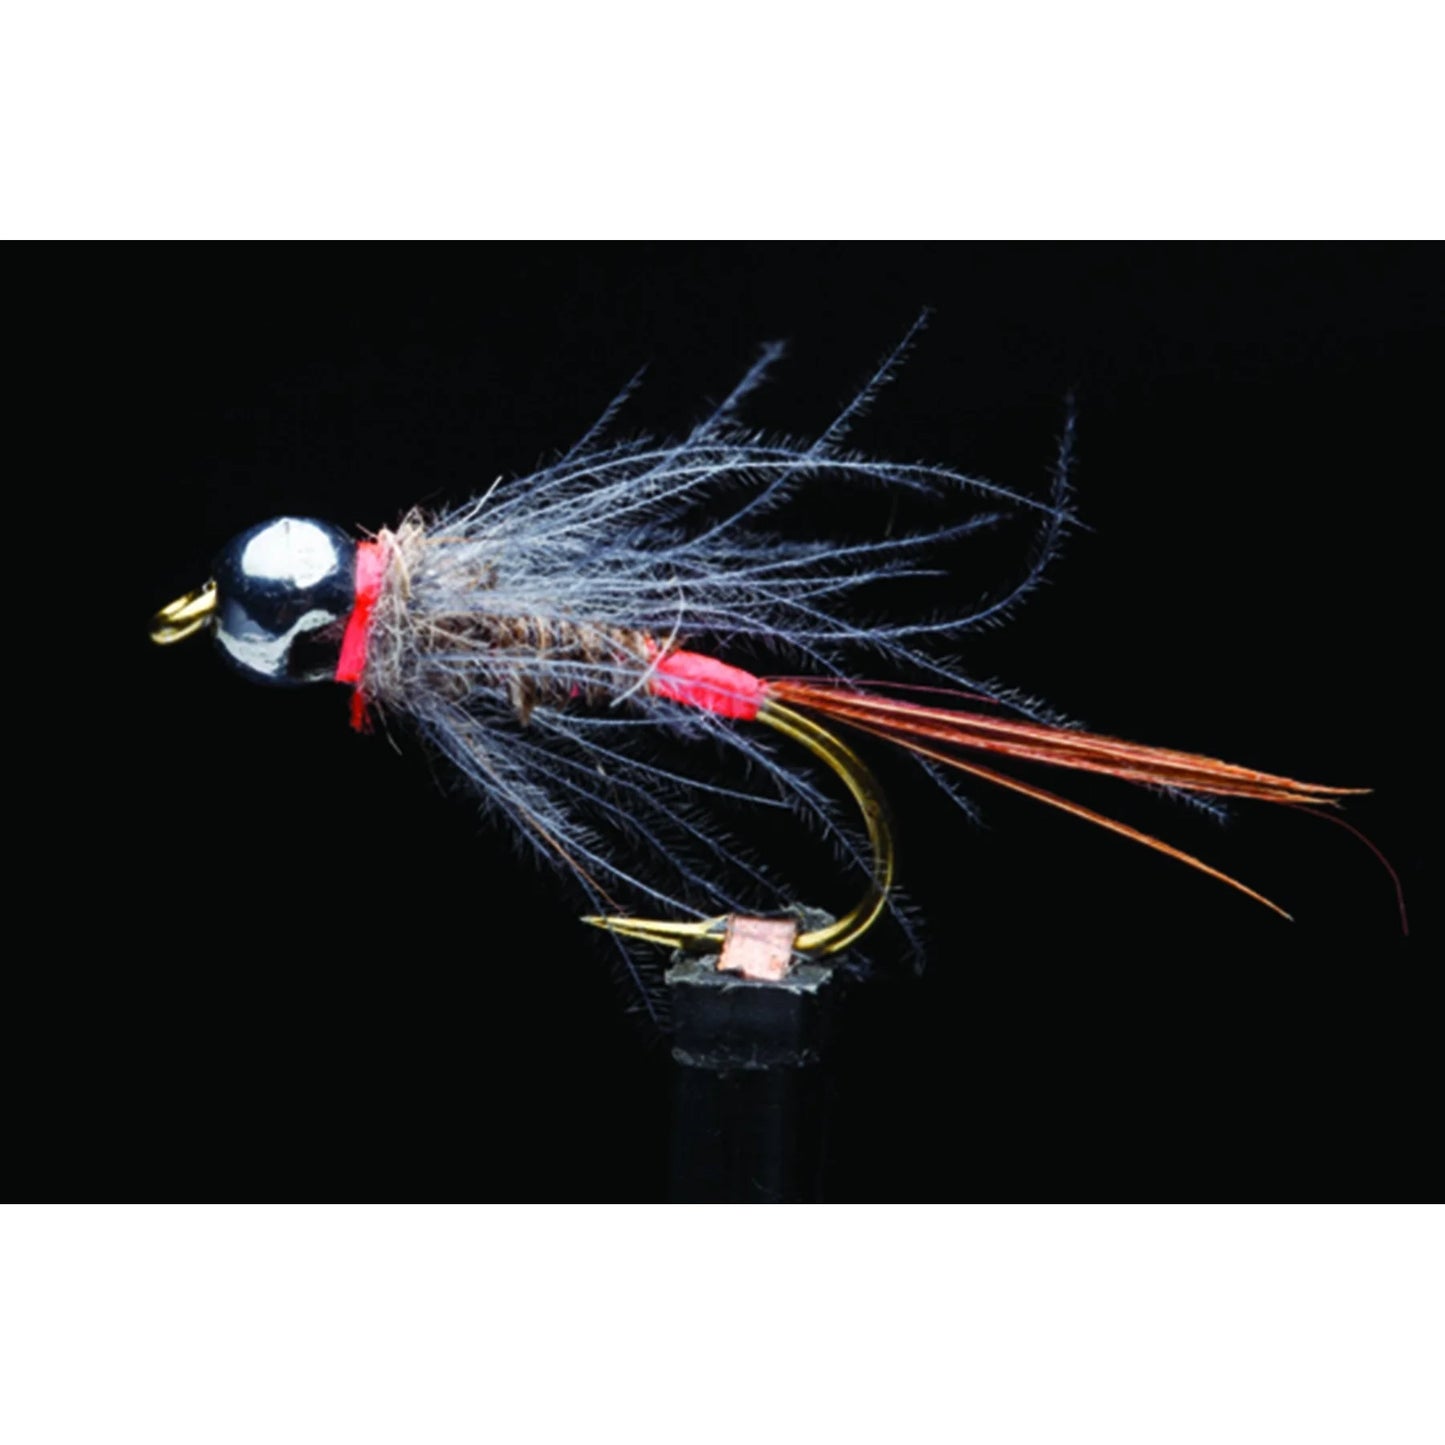 BTB Nosebleed Freshwater Fly-Lure - Freshwater Fly-Manic Tackle Project-#14-Fishing Station